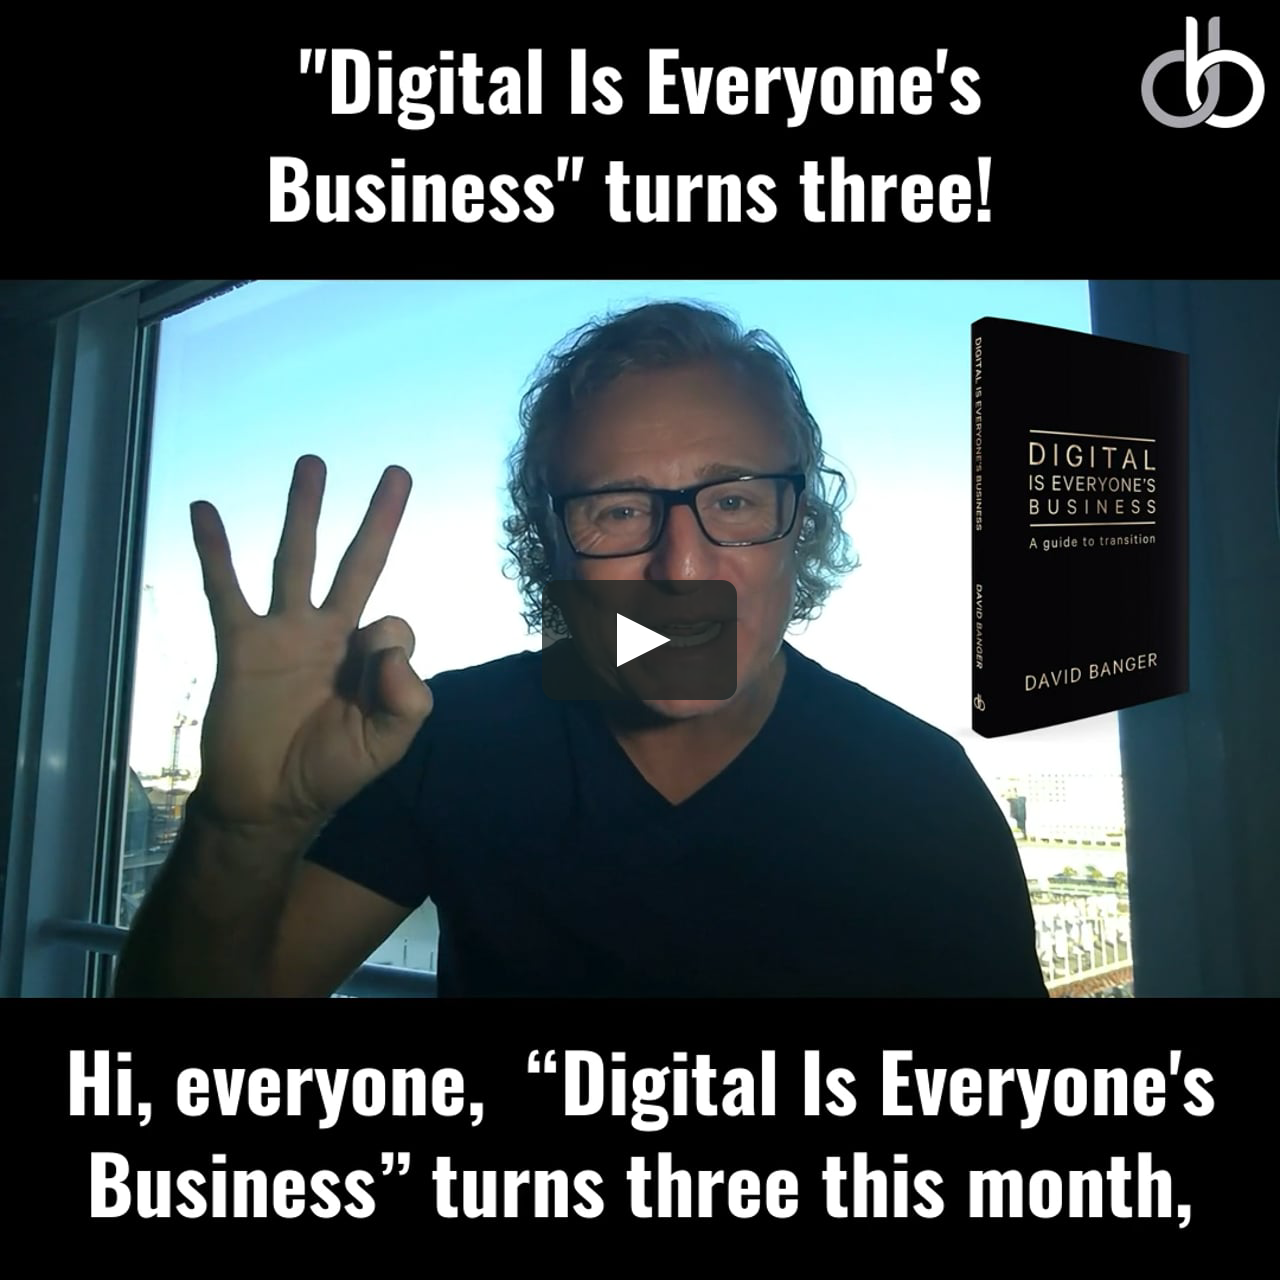 Anniversary Giveaway - Digital Is Everyone's Business